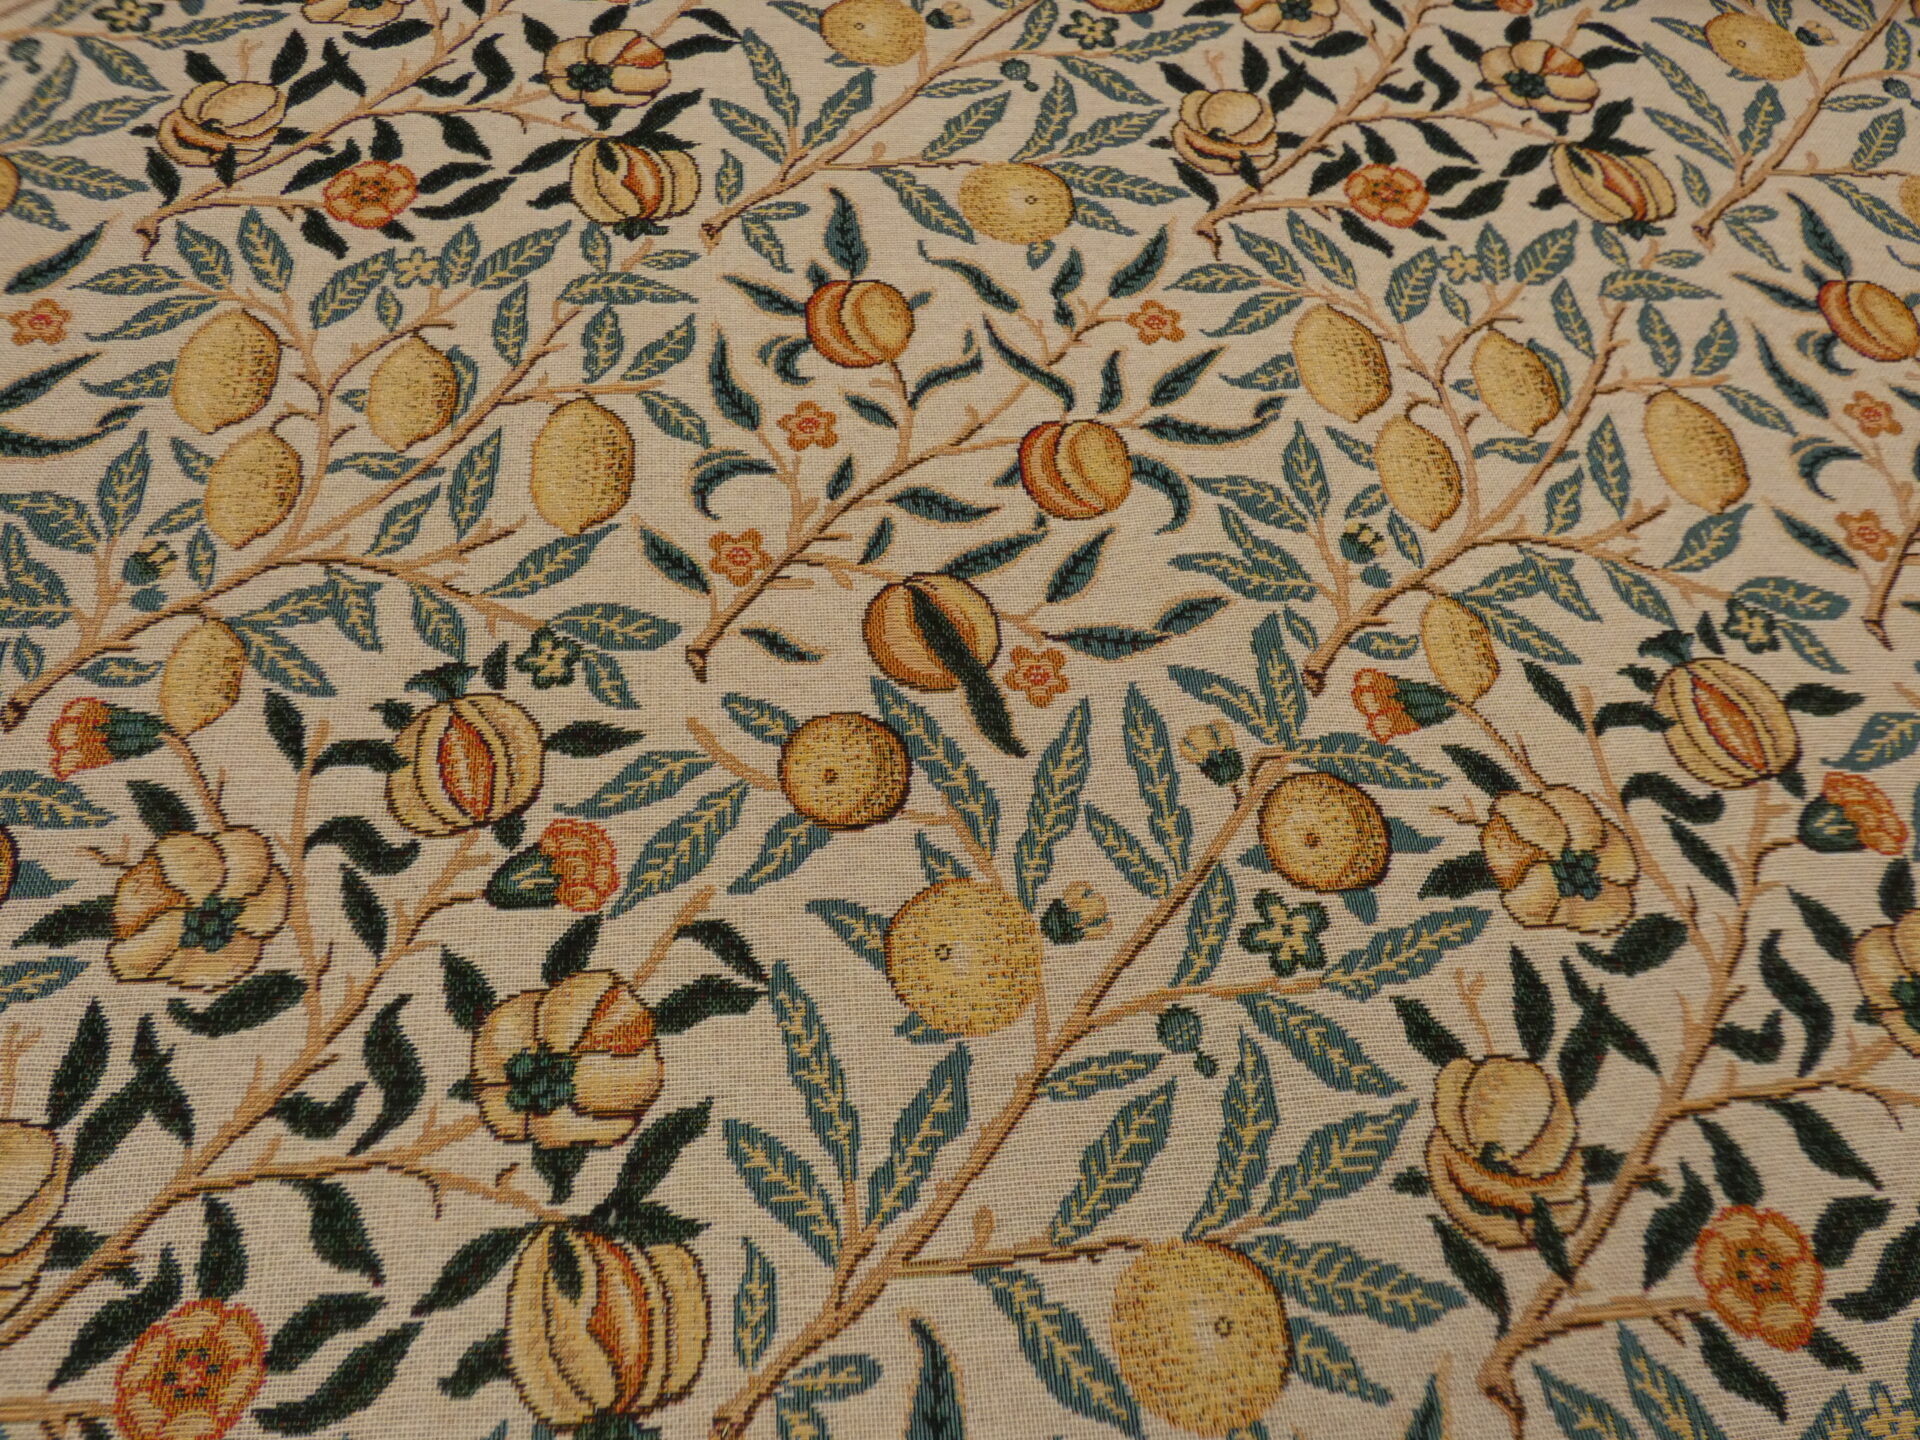 William Morris Pomegranate Tapestry - Free Samples Available - Fabric Online